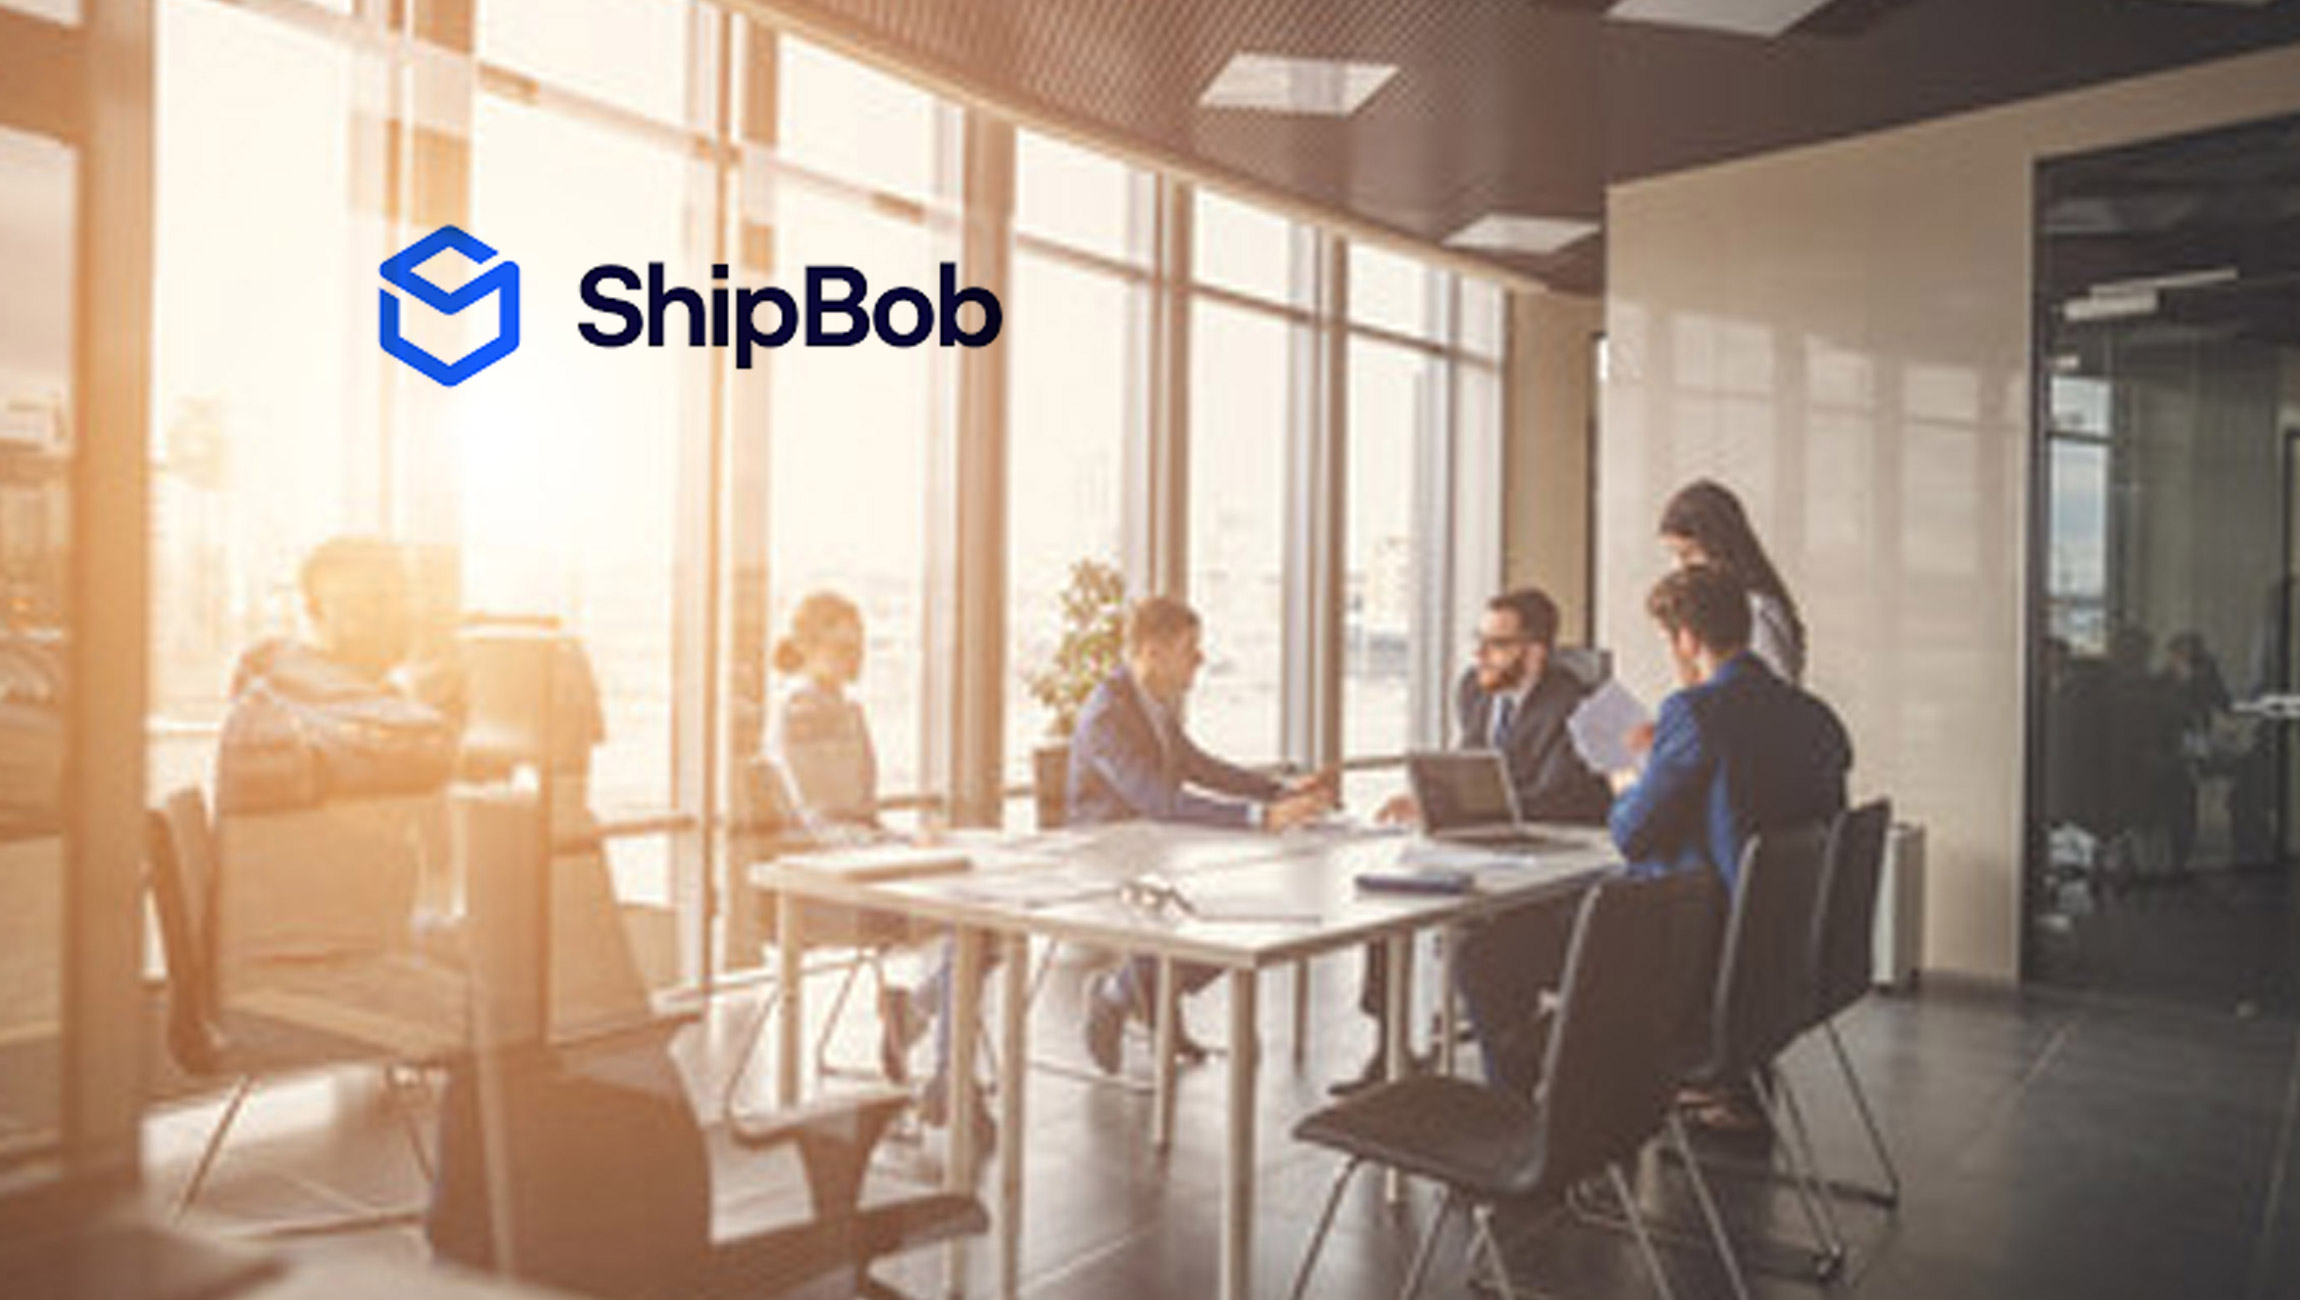 ShipBob To Open Newest Fulfillment Center in Toronto